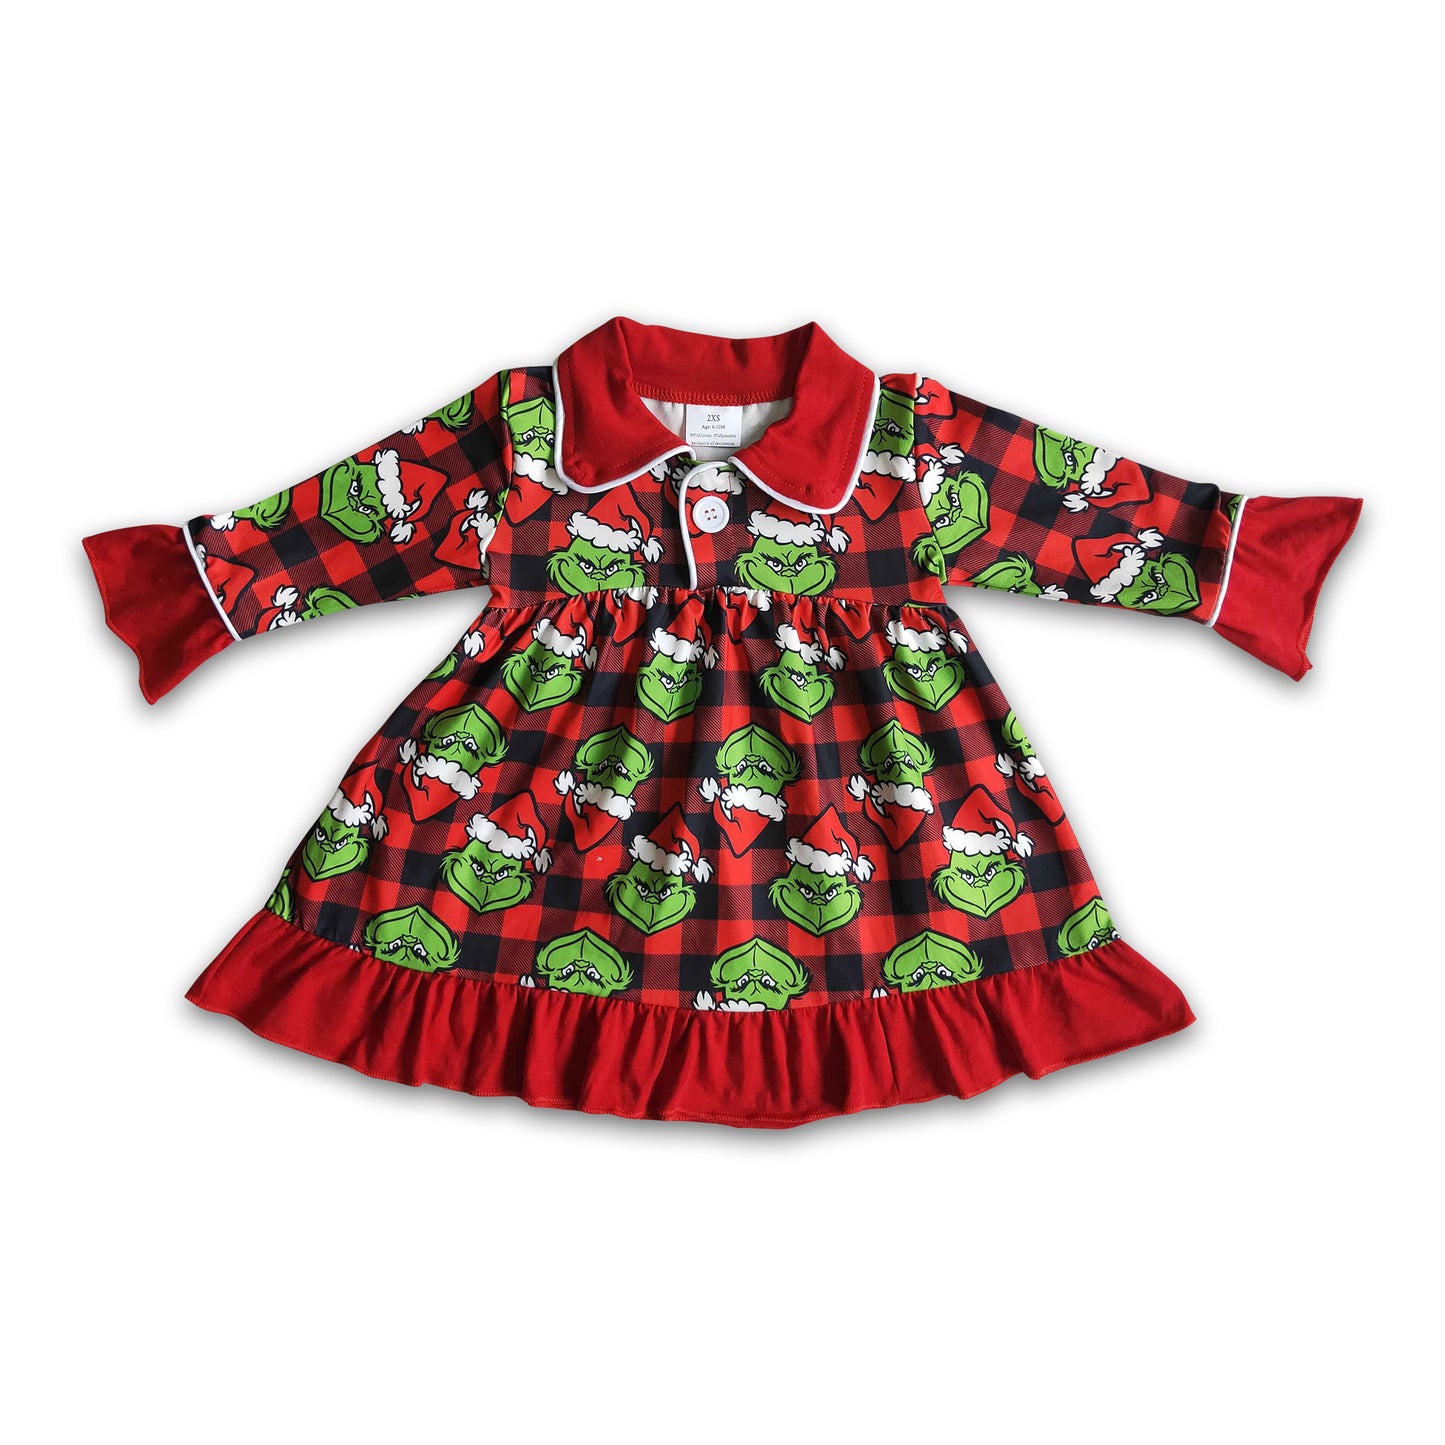 Cute green face print baby girls Christmas night gown